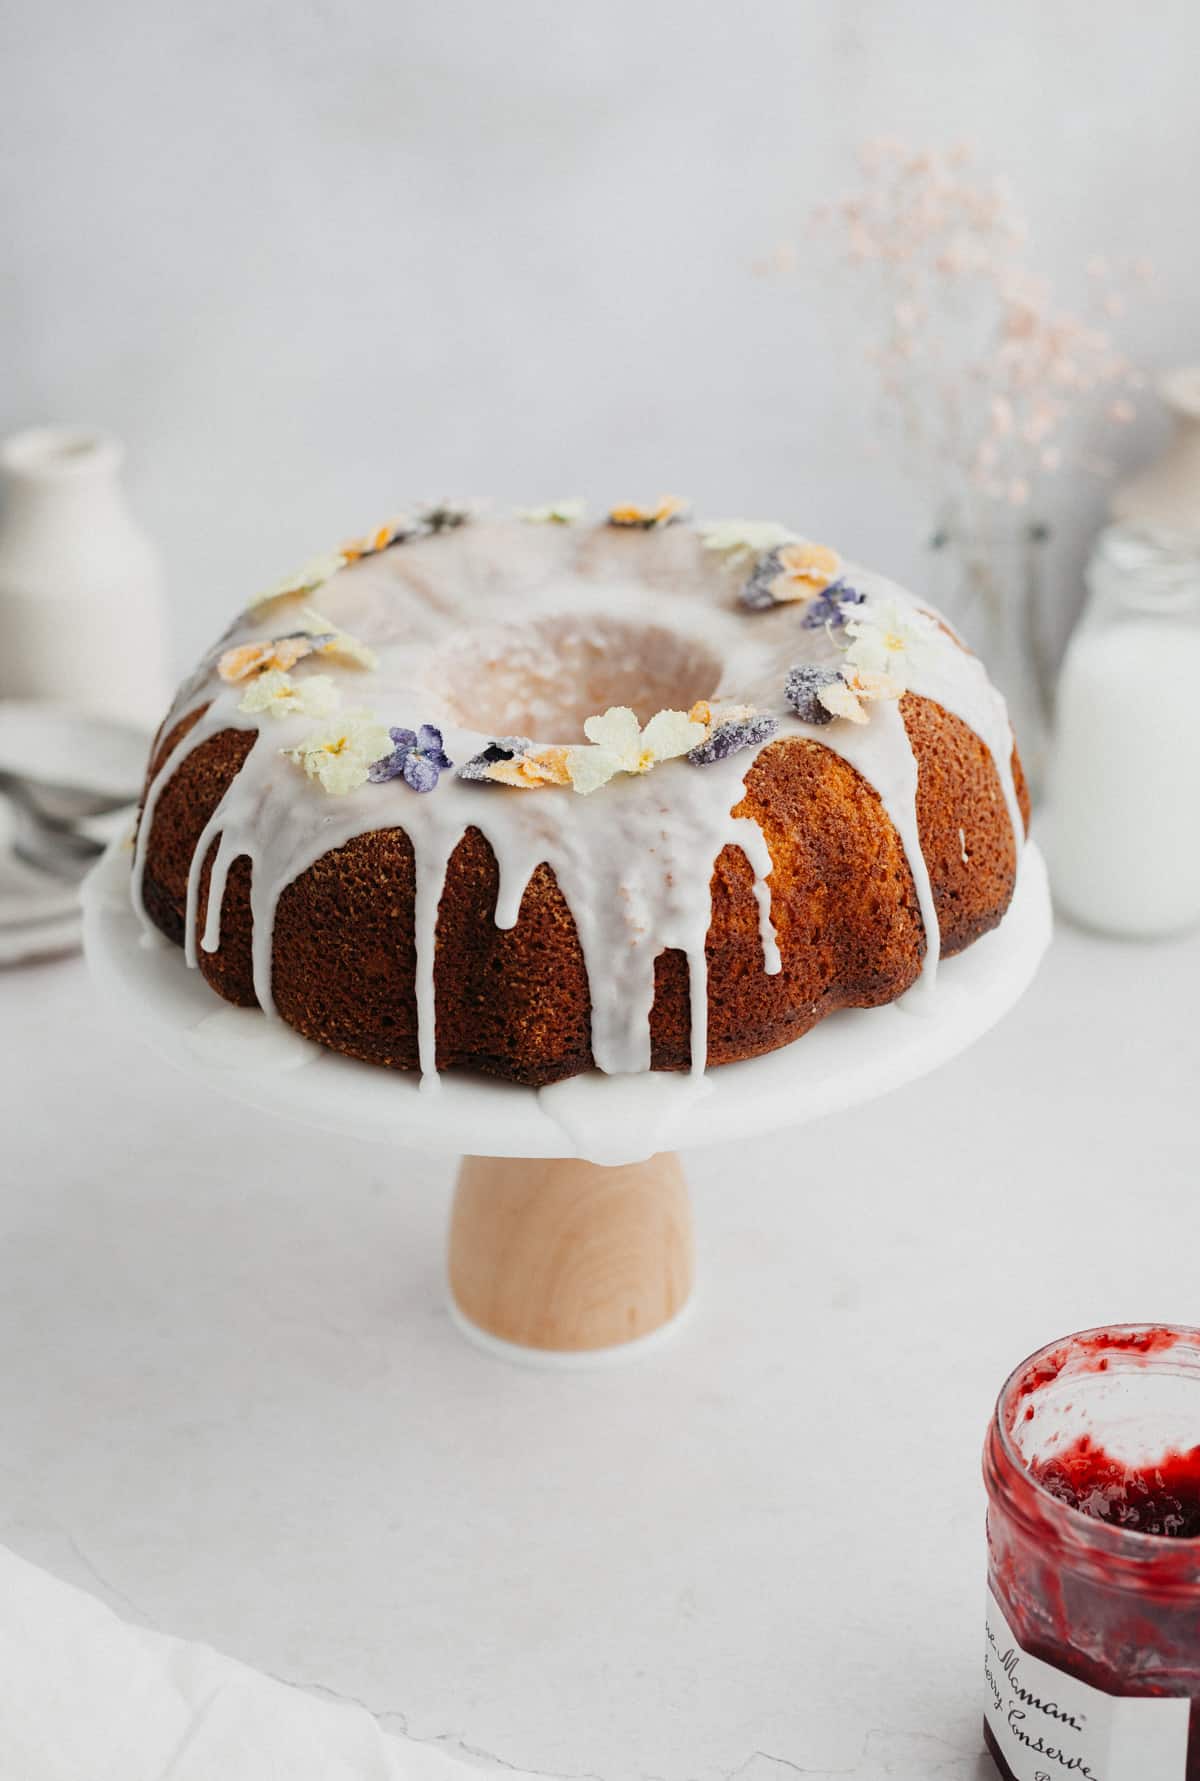 A bundt cake with white icing on it on a white cake stand.